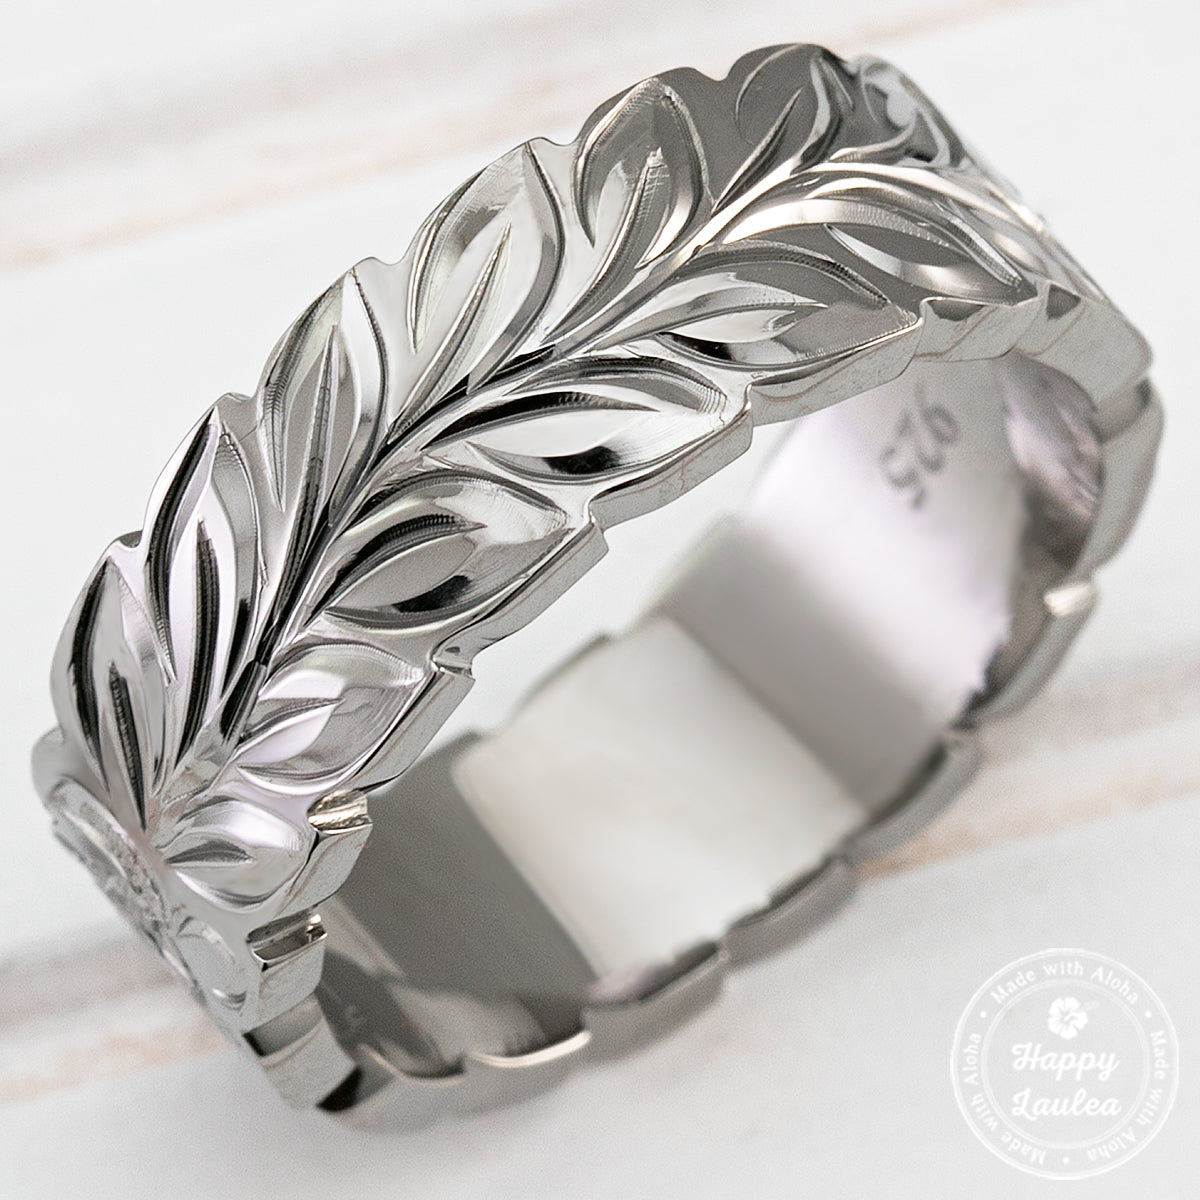 Black Rhodium 925 Sterling Silver Hand Engraved Ring with Maile Leaf & Hawaiian Sea Turtle Design - 8mm, Flat Shape, Comfort Fitment